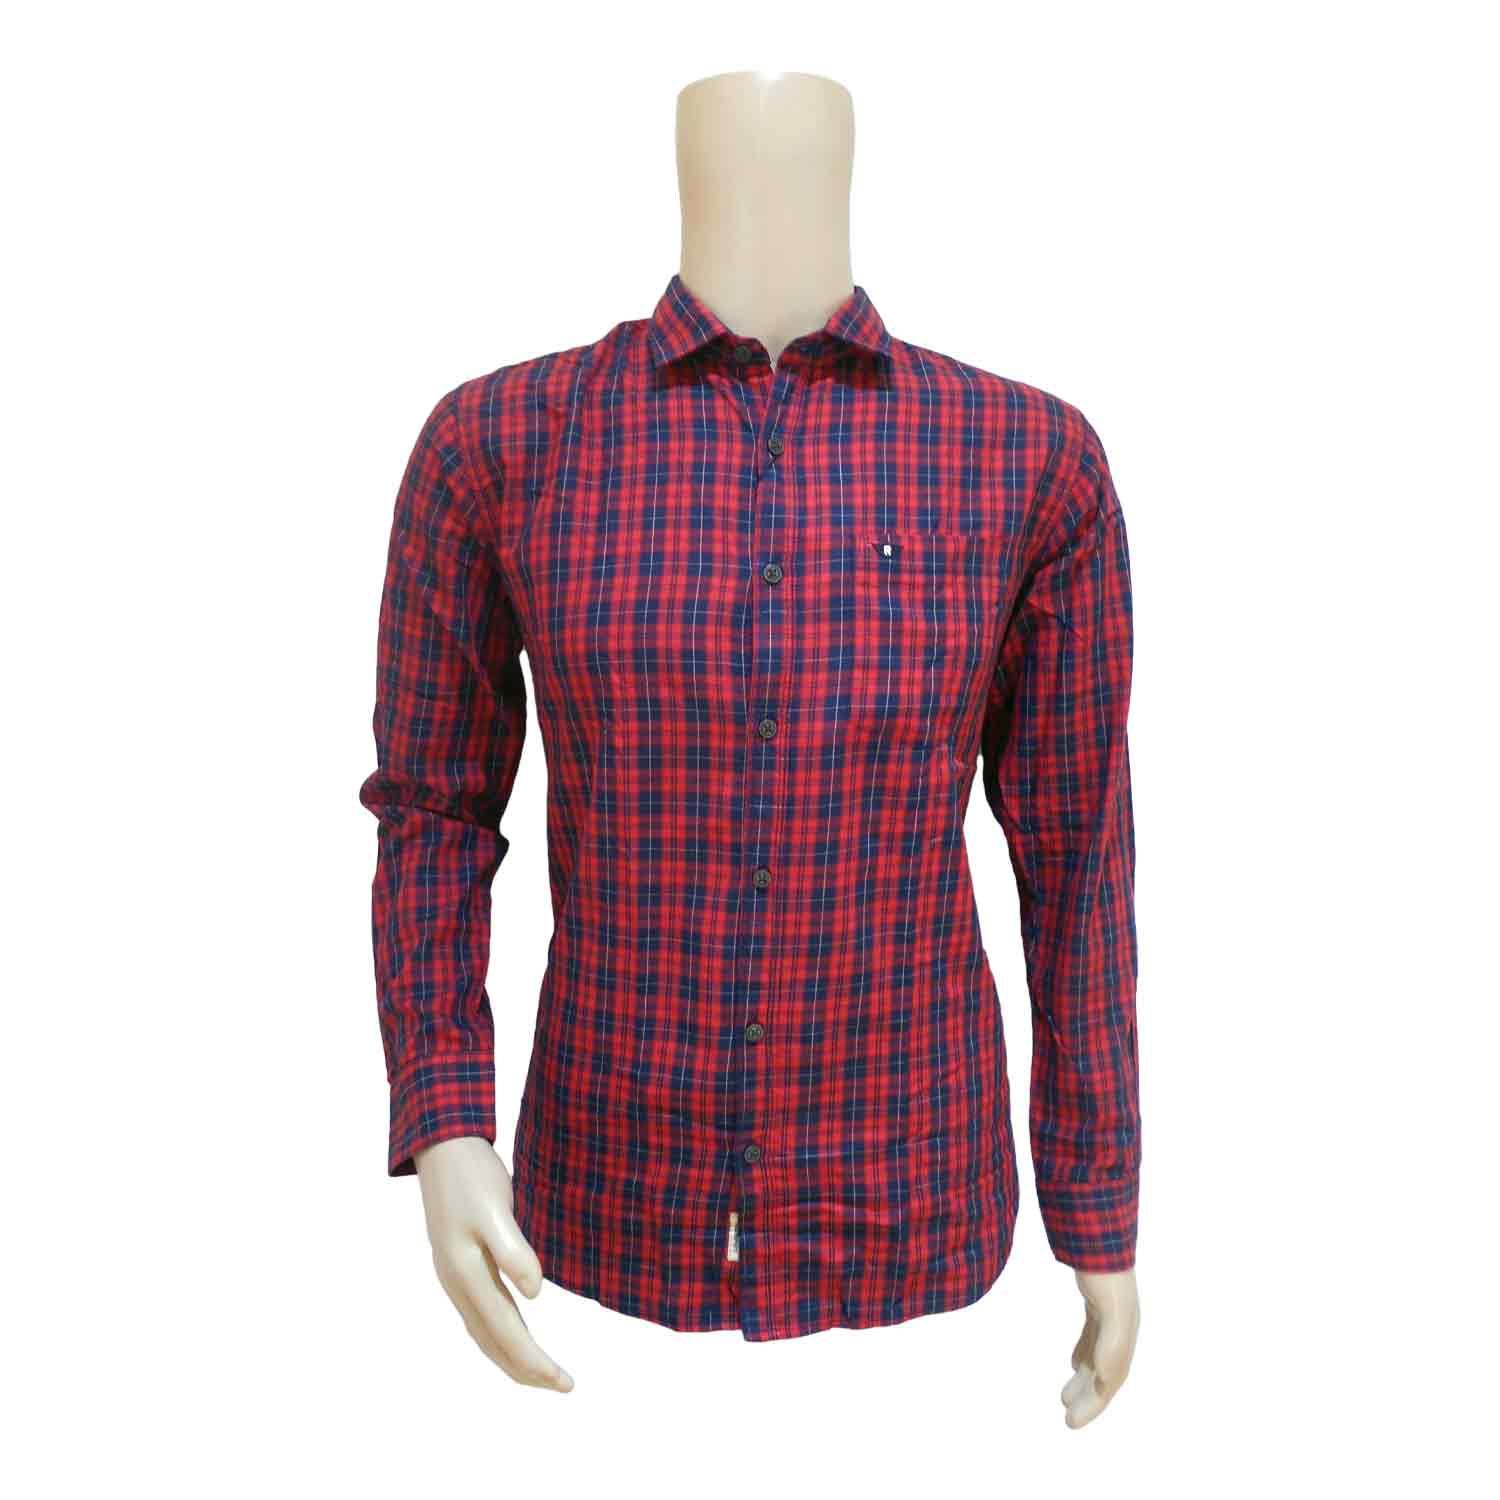 MEN'S SHIRT RED SPIRIT 2103 RED CHECK SIZE-L